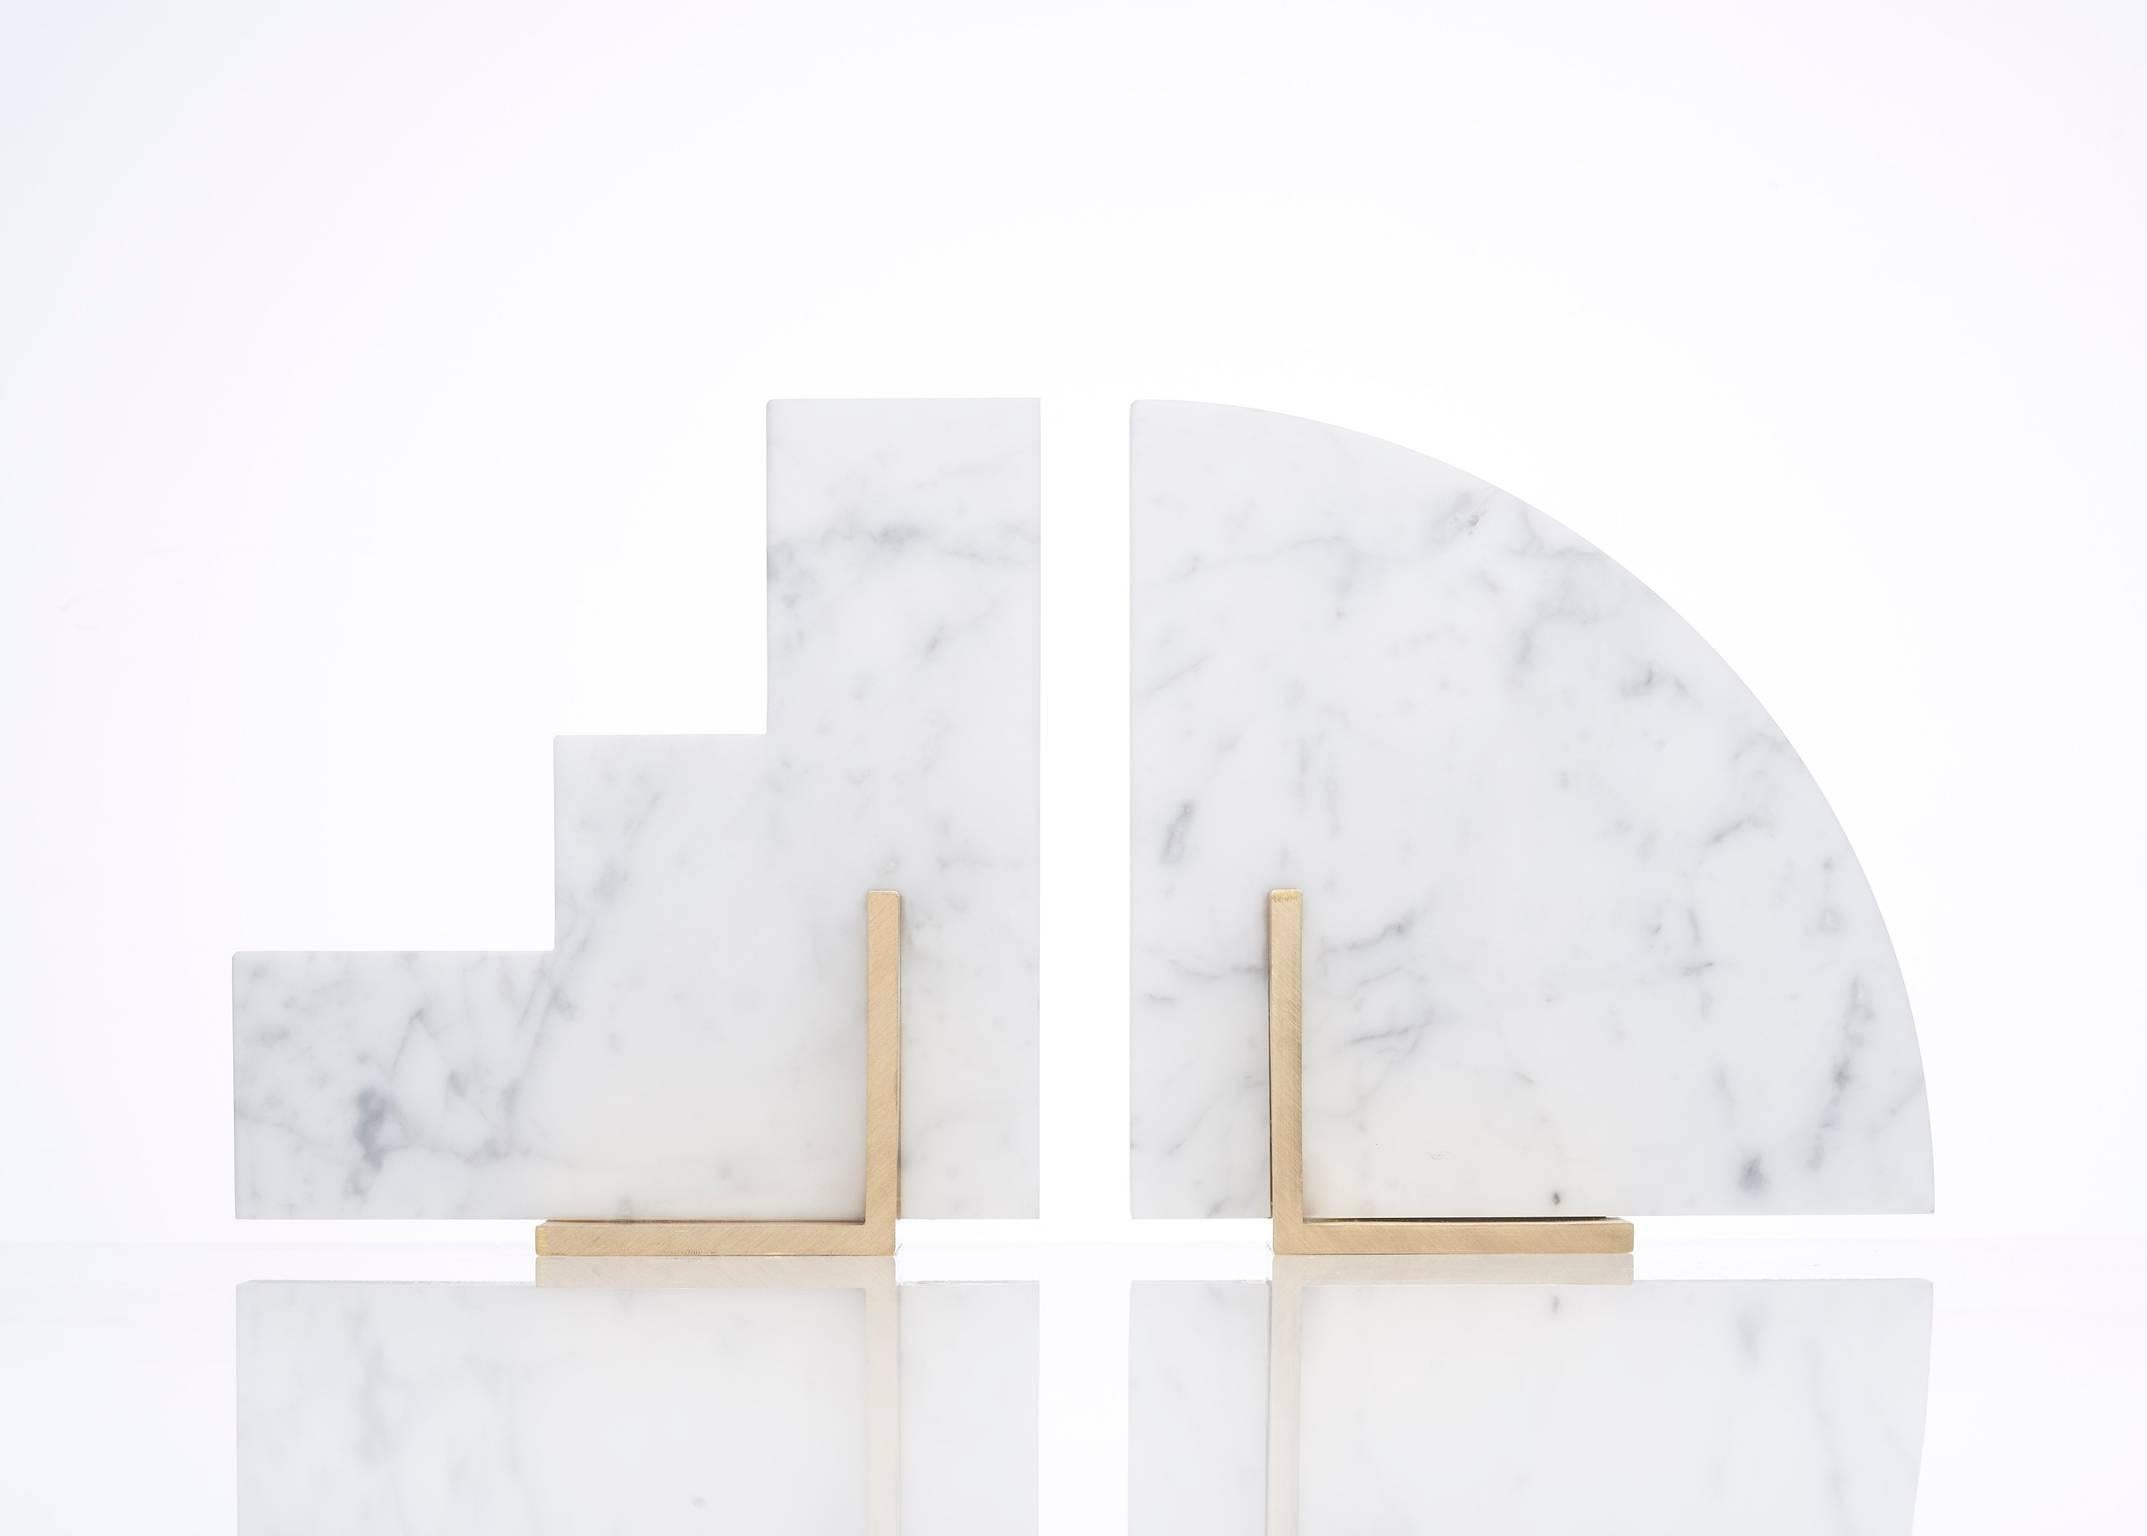 Meet Curvy and Steppy; the two individual bookends which as a pair are known as The Odd Couple Bookends.
Here shown in a honed Italian Carrara marble and a brushed brass base.
The marble cut into two geometric shapes and balanced over a brass